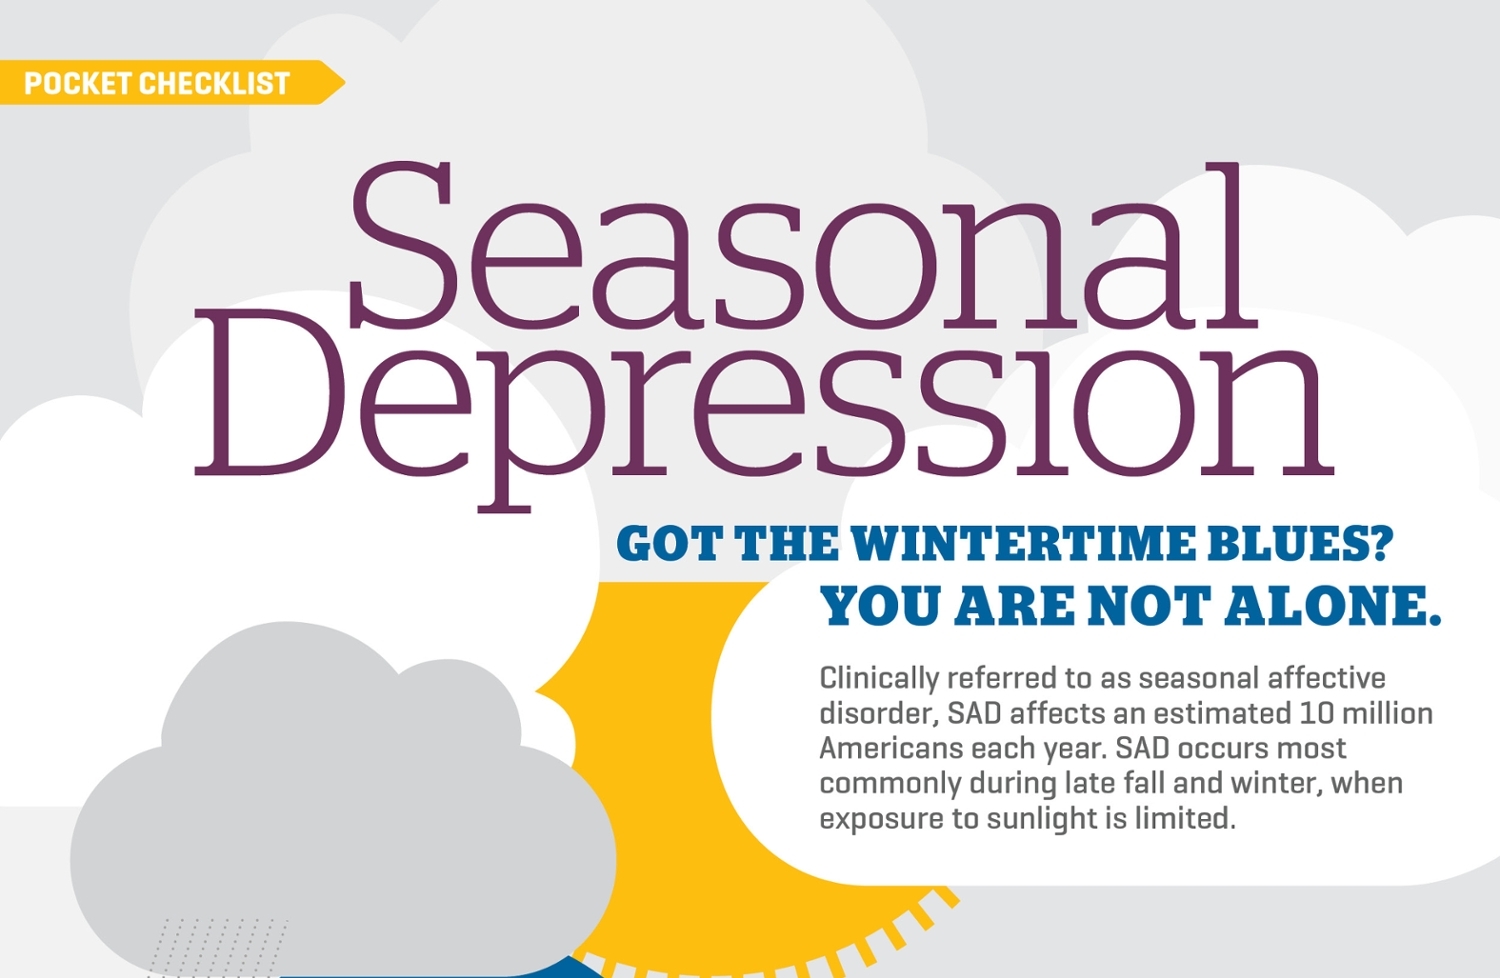 How Can I Manage My Seasonal Depression Disorder Without Medications